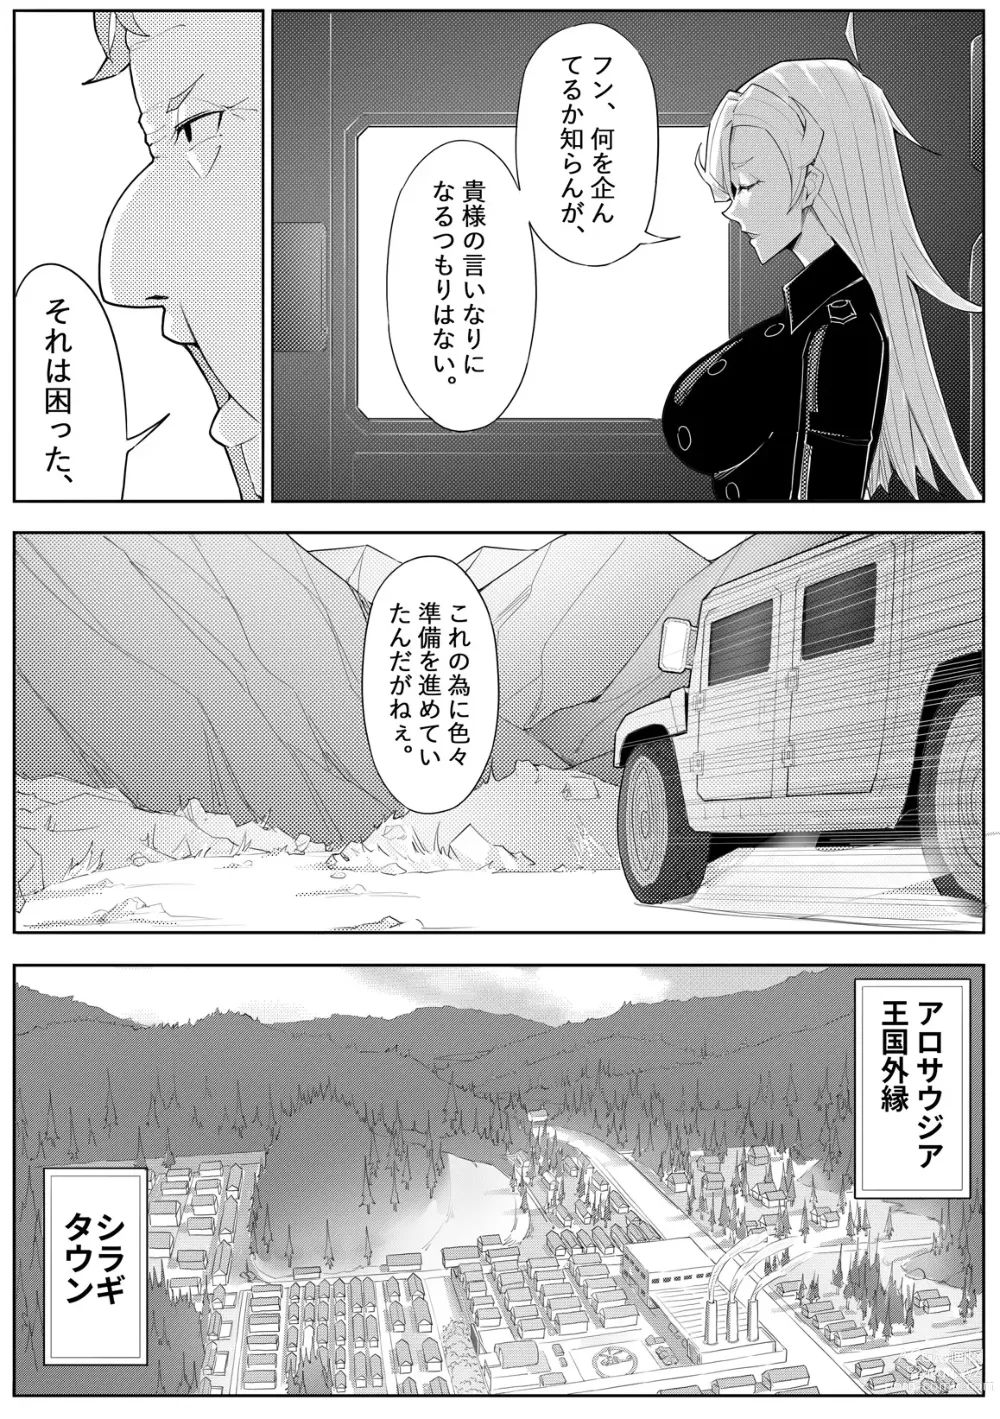 Page 15 of doujinshi Skin Normal Mission 04